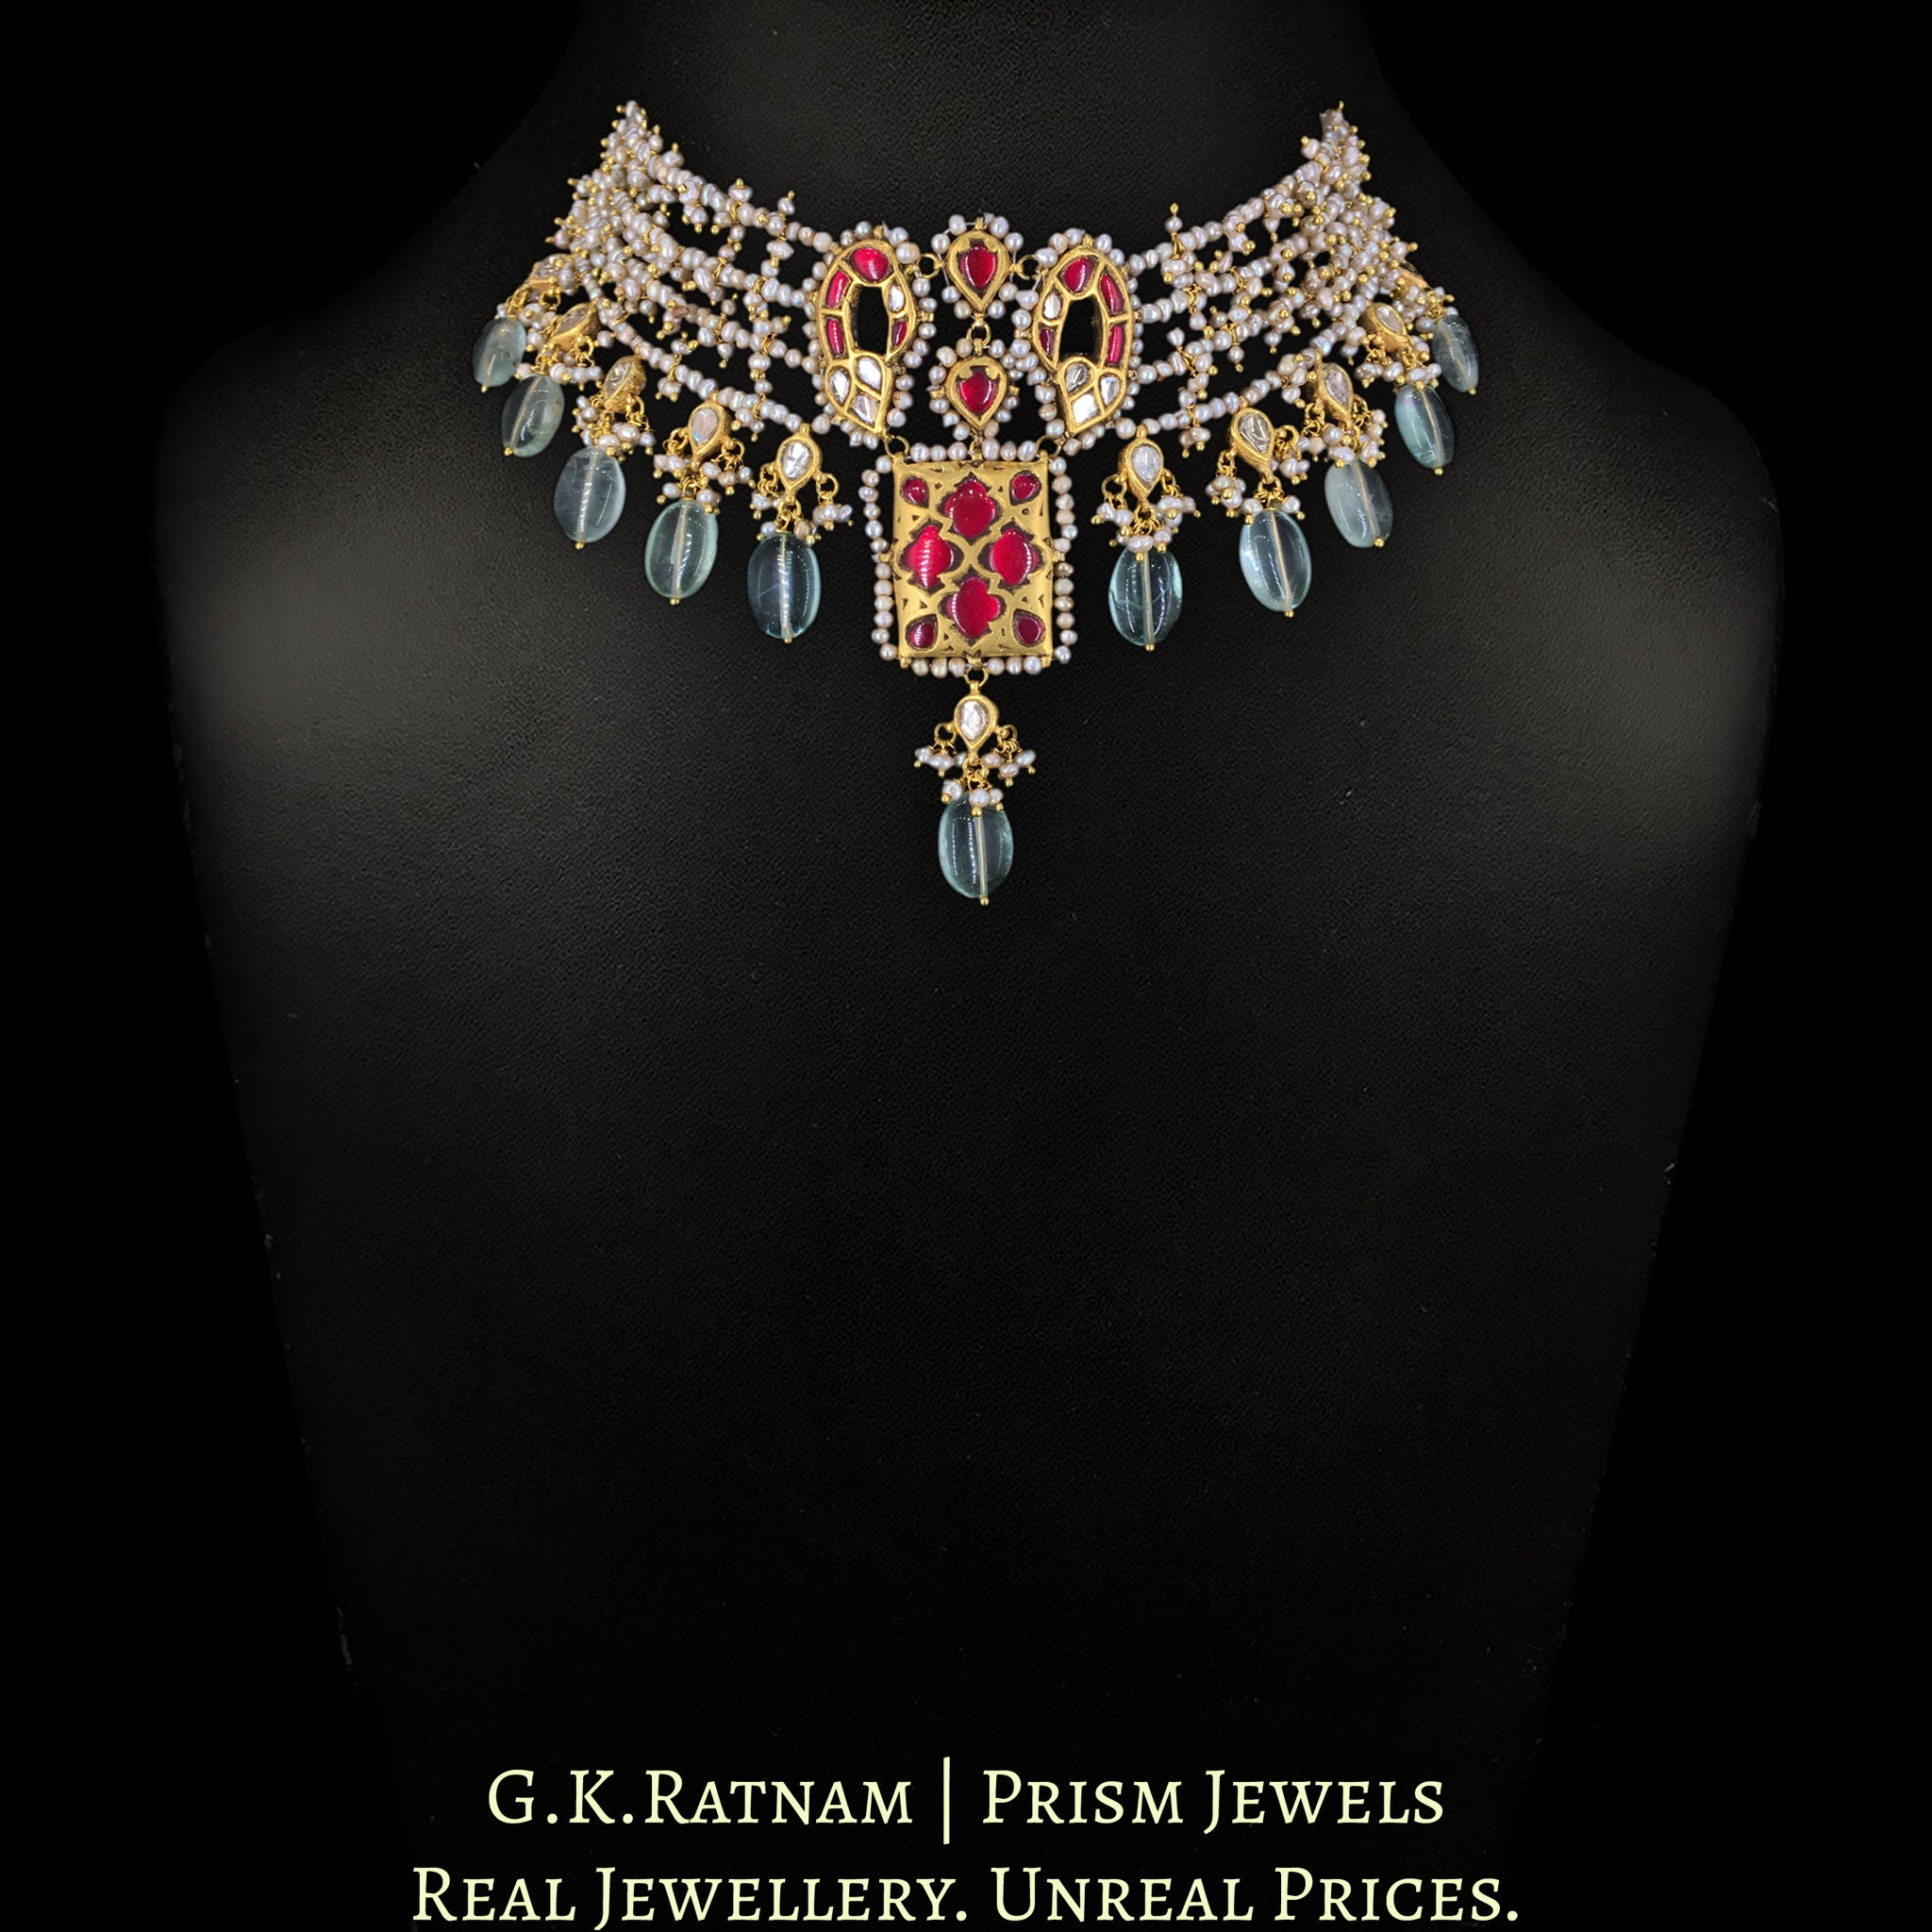 23k Gold and Diamond Polki Choker Necklace Set with Antiqued Hyderabadi Pearls